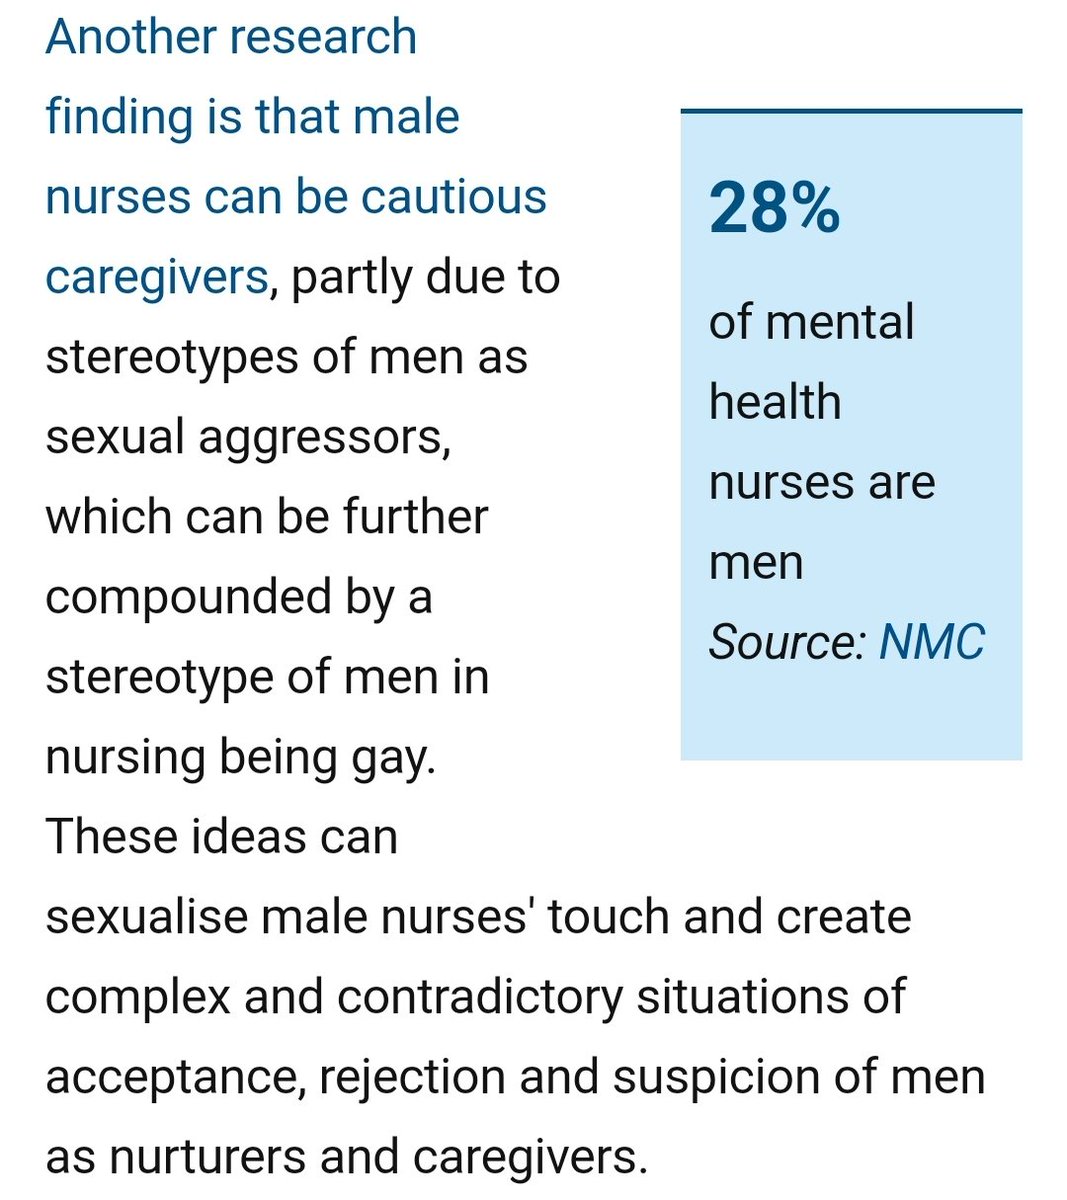 This article is a bit more balanced than most on the subject of #MenInNursing - it talks about men as caring.

But once again, it plays up the idea that men are unfairly seen as aggressors. This isn't about men - it's about women's safety.

1/3 of women are victims/survivors of